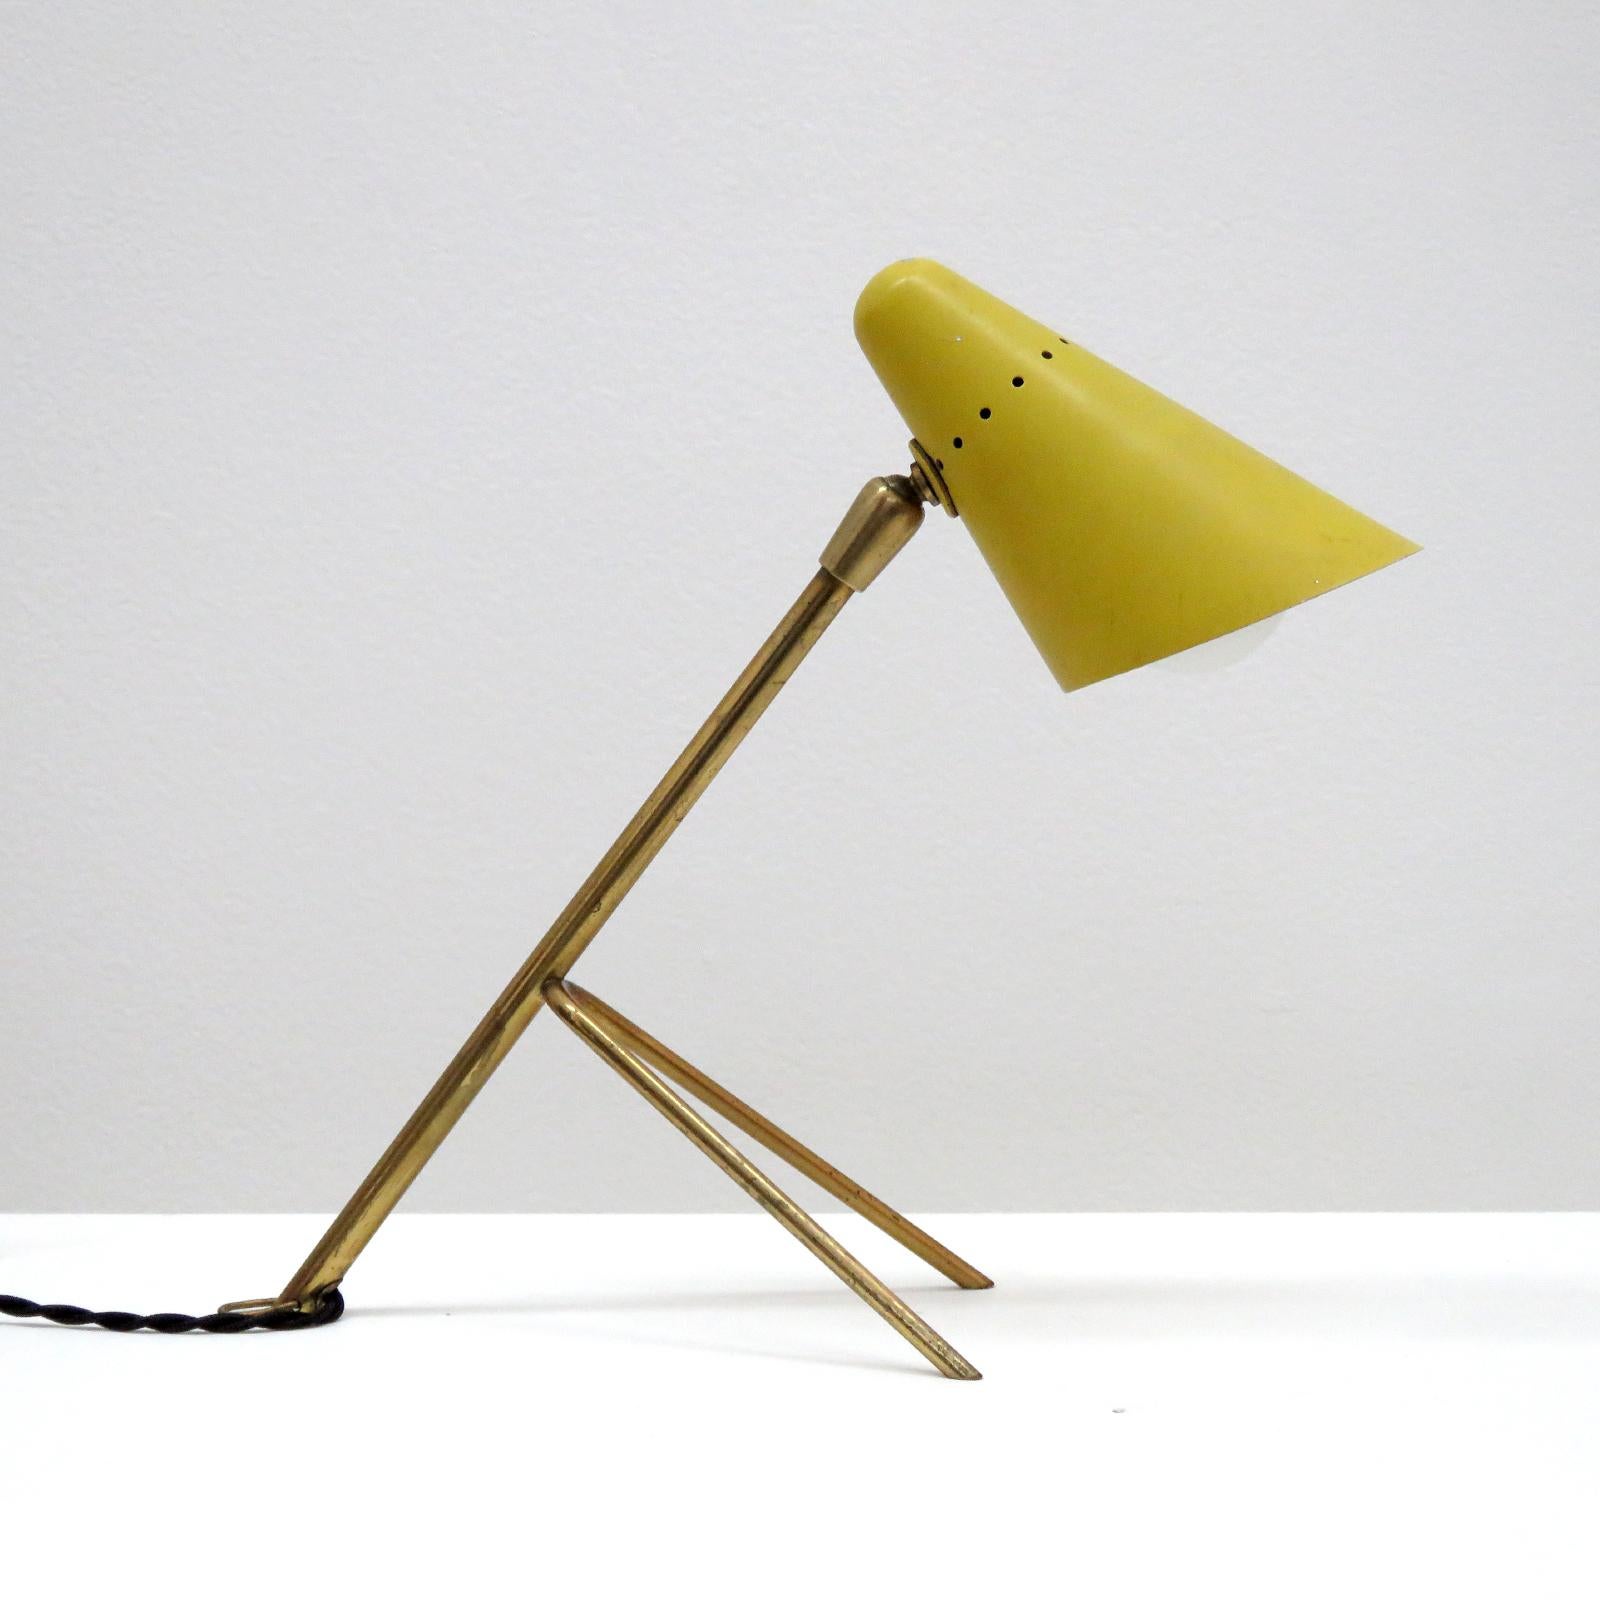 Petite table lamp by Boris Lacroix, brass frame with perforated, enameled hood with perforations, fully adjustable, can be used as a wall lamp.